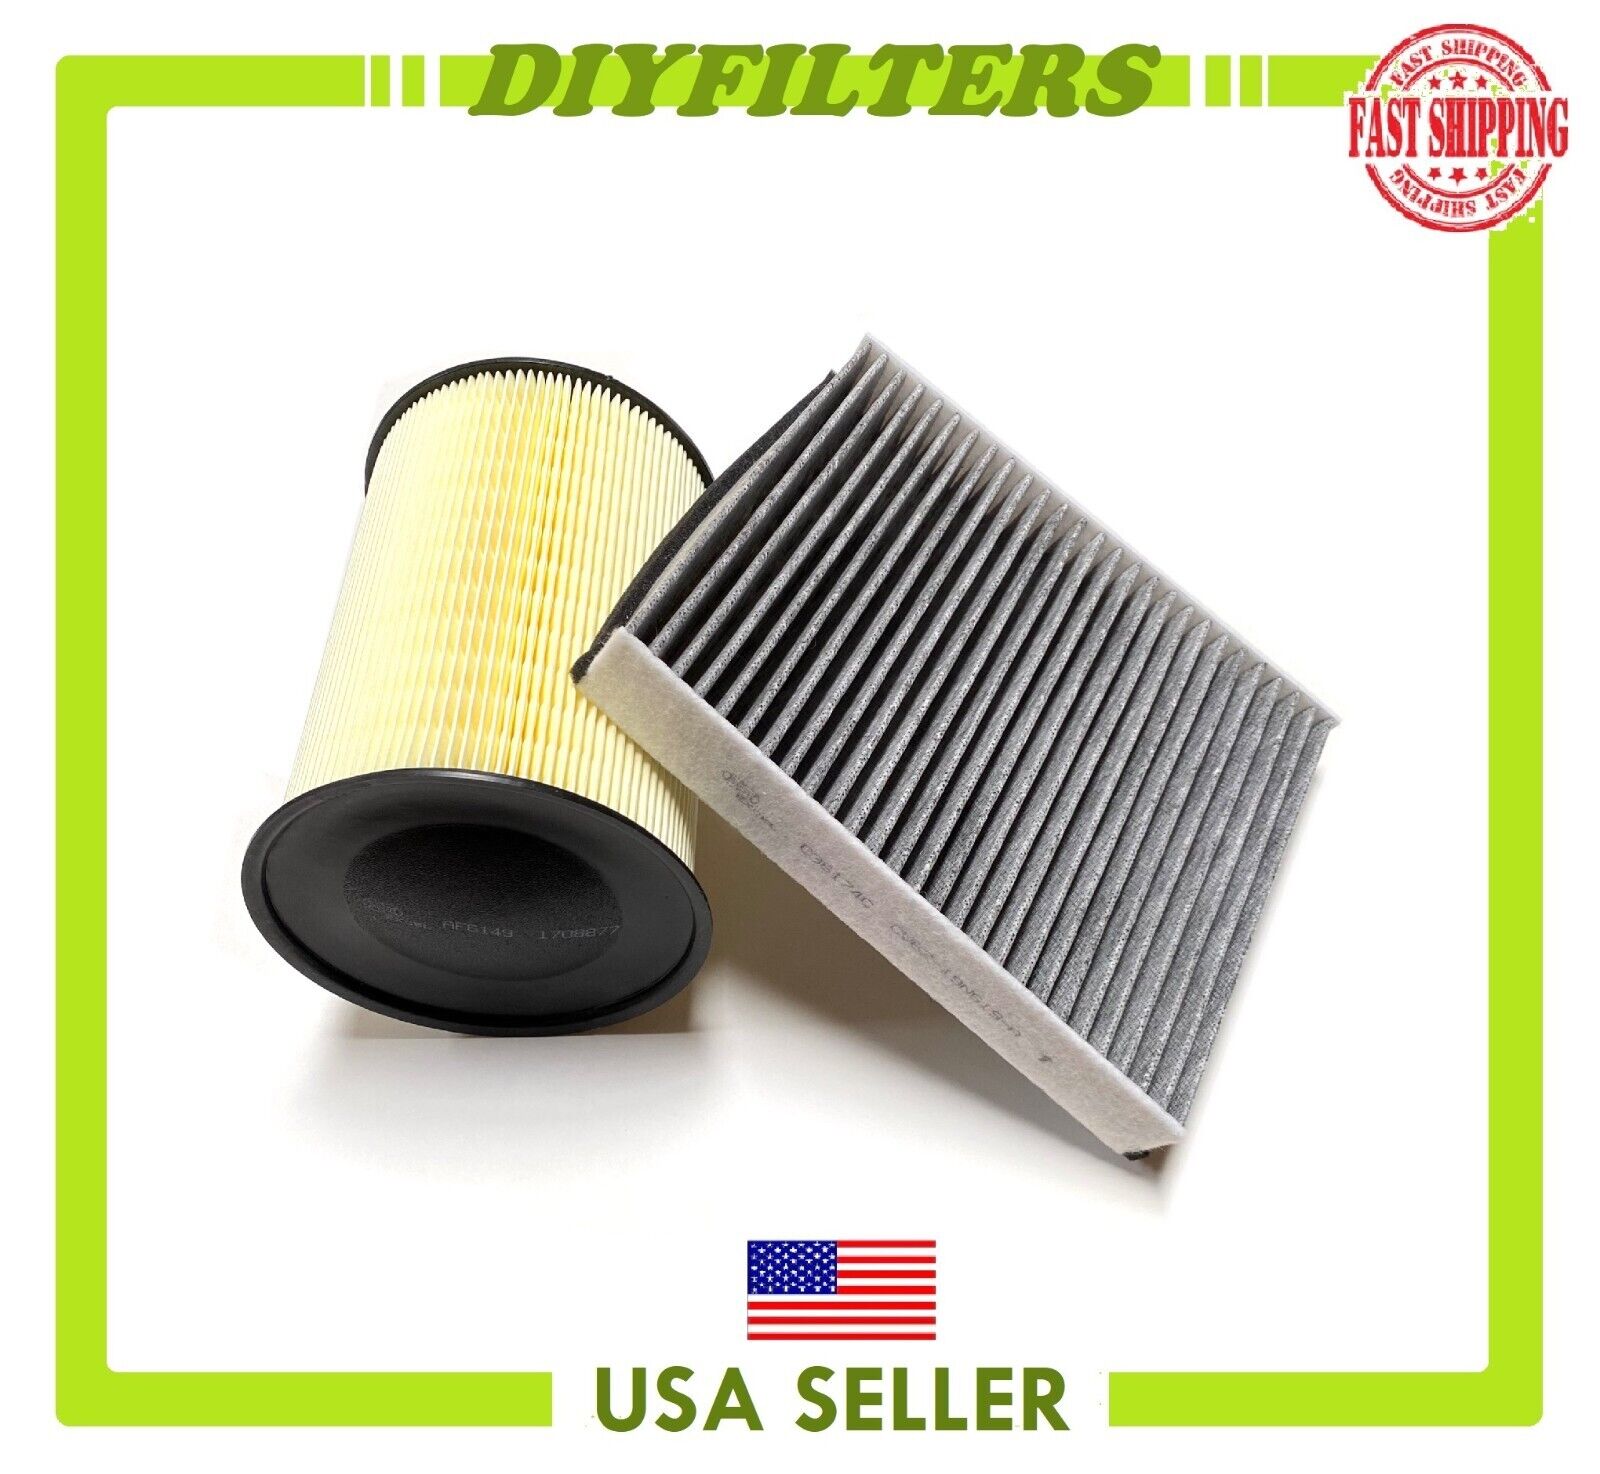 Engine & Carbon Cabin Air Filter for 2013 - 19 Ford Escape 2015 -19 Lincoln MKC